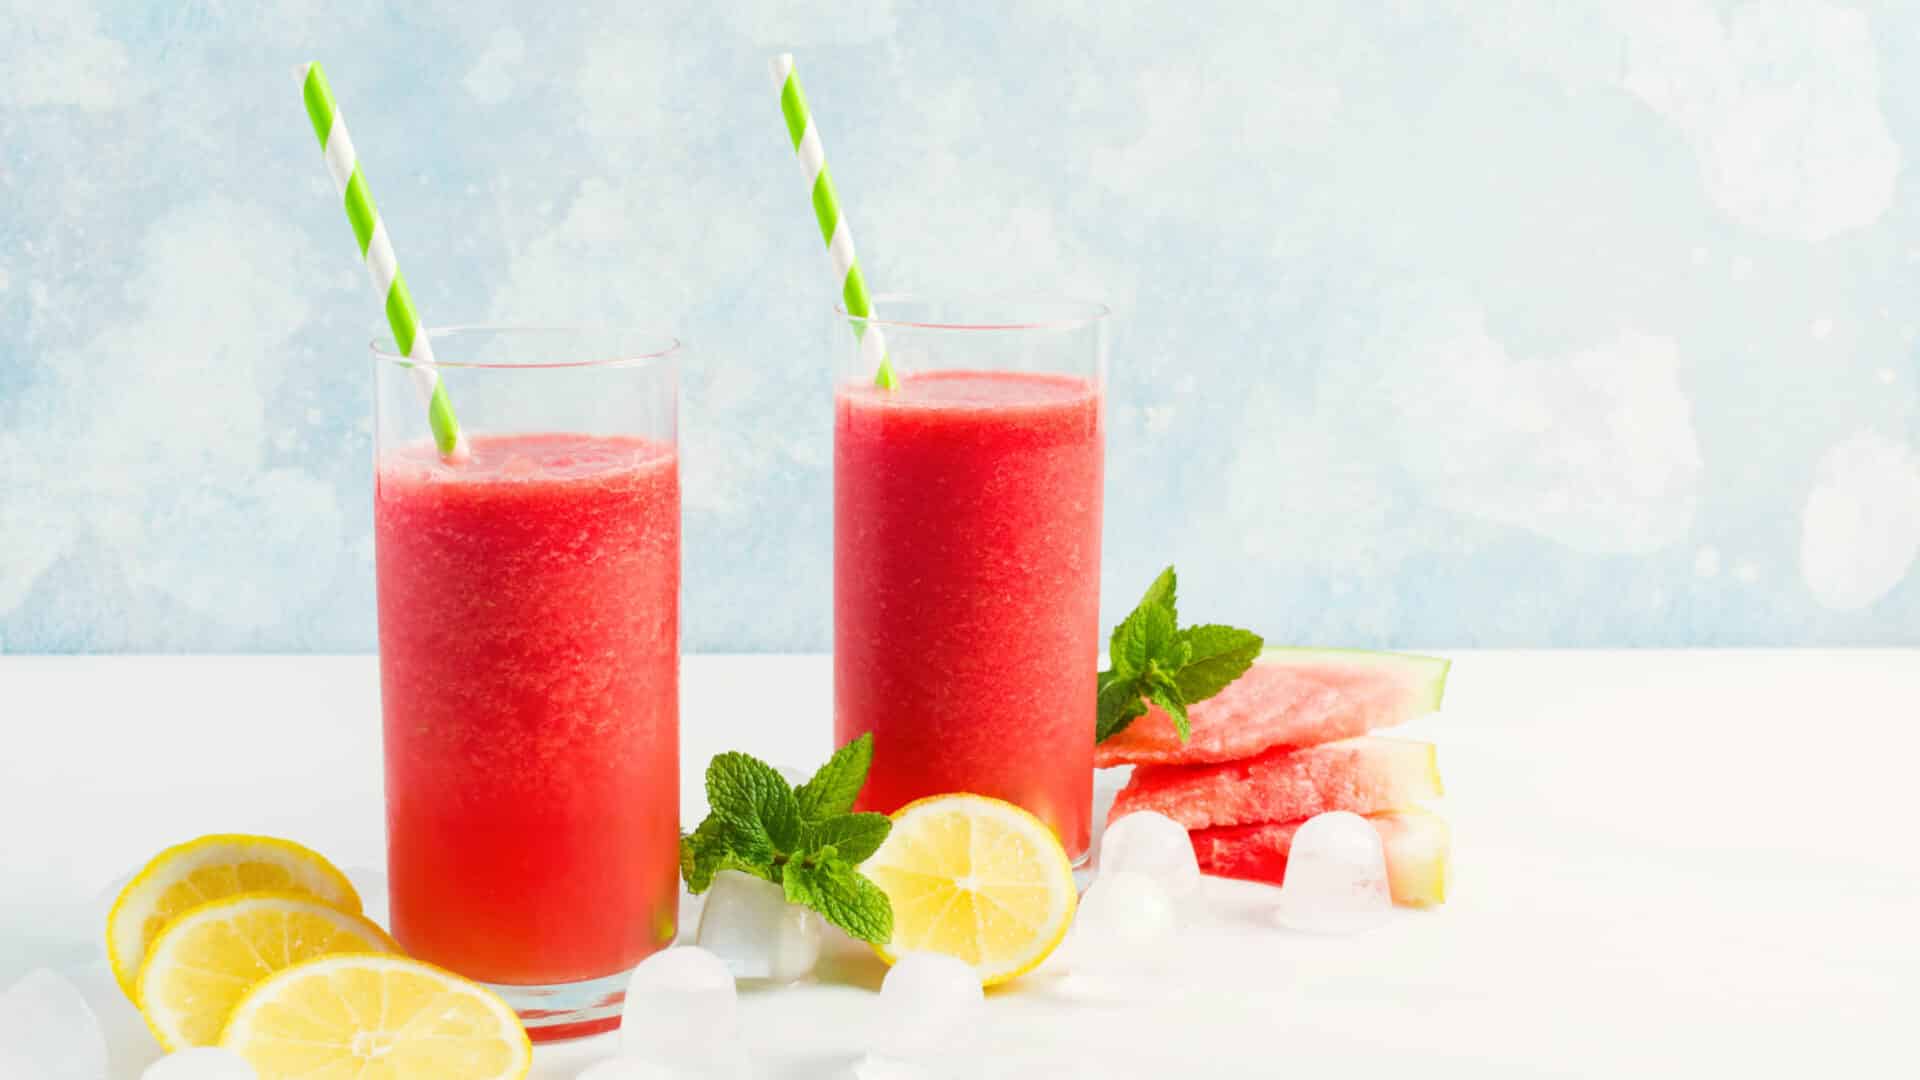 Glasses of red watermelon and lemon slush with lemons, watermelon and lemons, with green and white striped straws